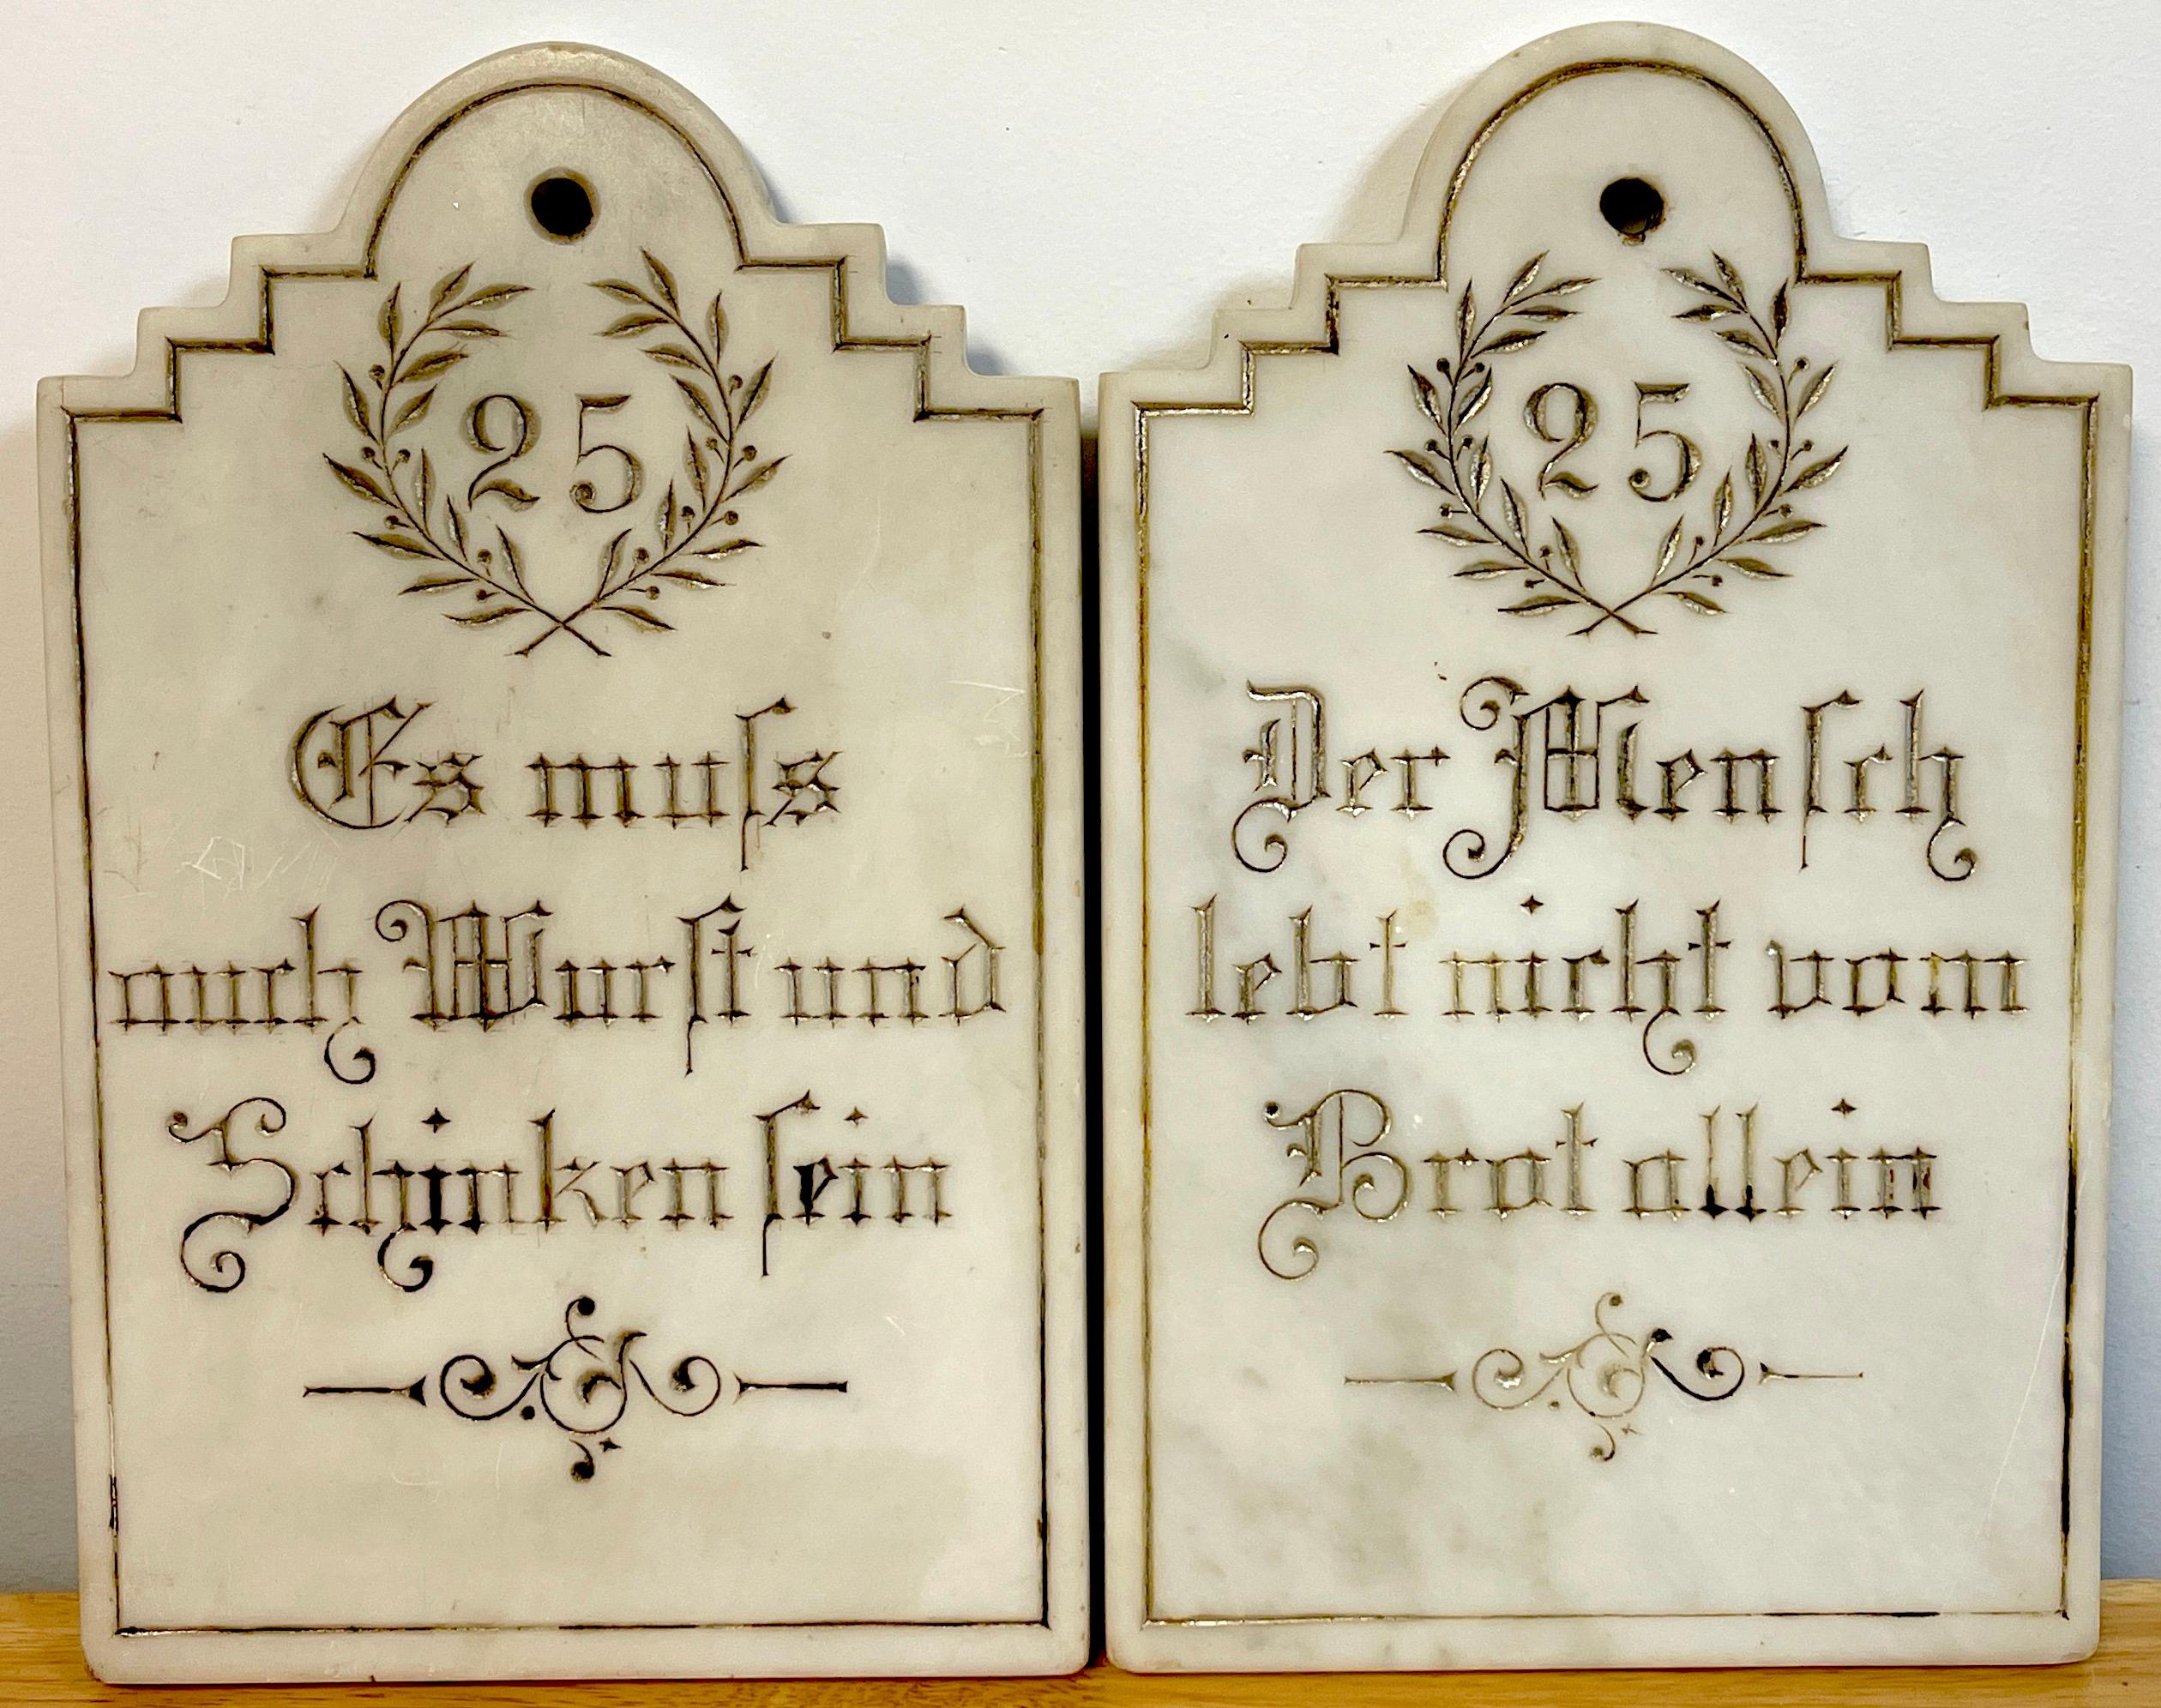 Pair of Antique German Engraved Marble Whimsical Butchers Shop Cutting Boards
Custom made for a 25th Anniversary of a Butcher's shop
circa 1900s

Each one in the Neoclassical style, carved white marble in the shape of a cutting board, Engraved